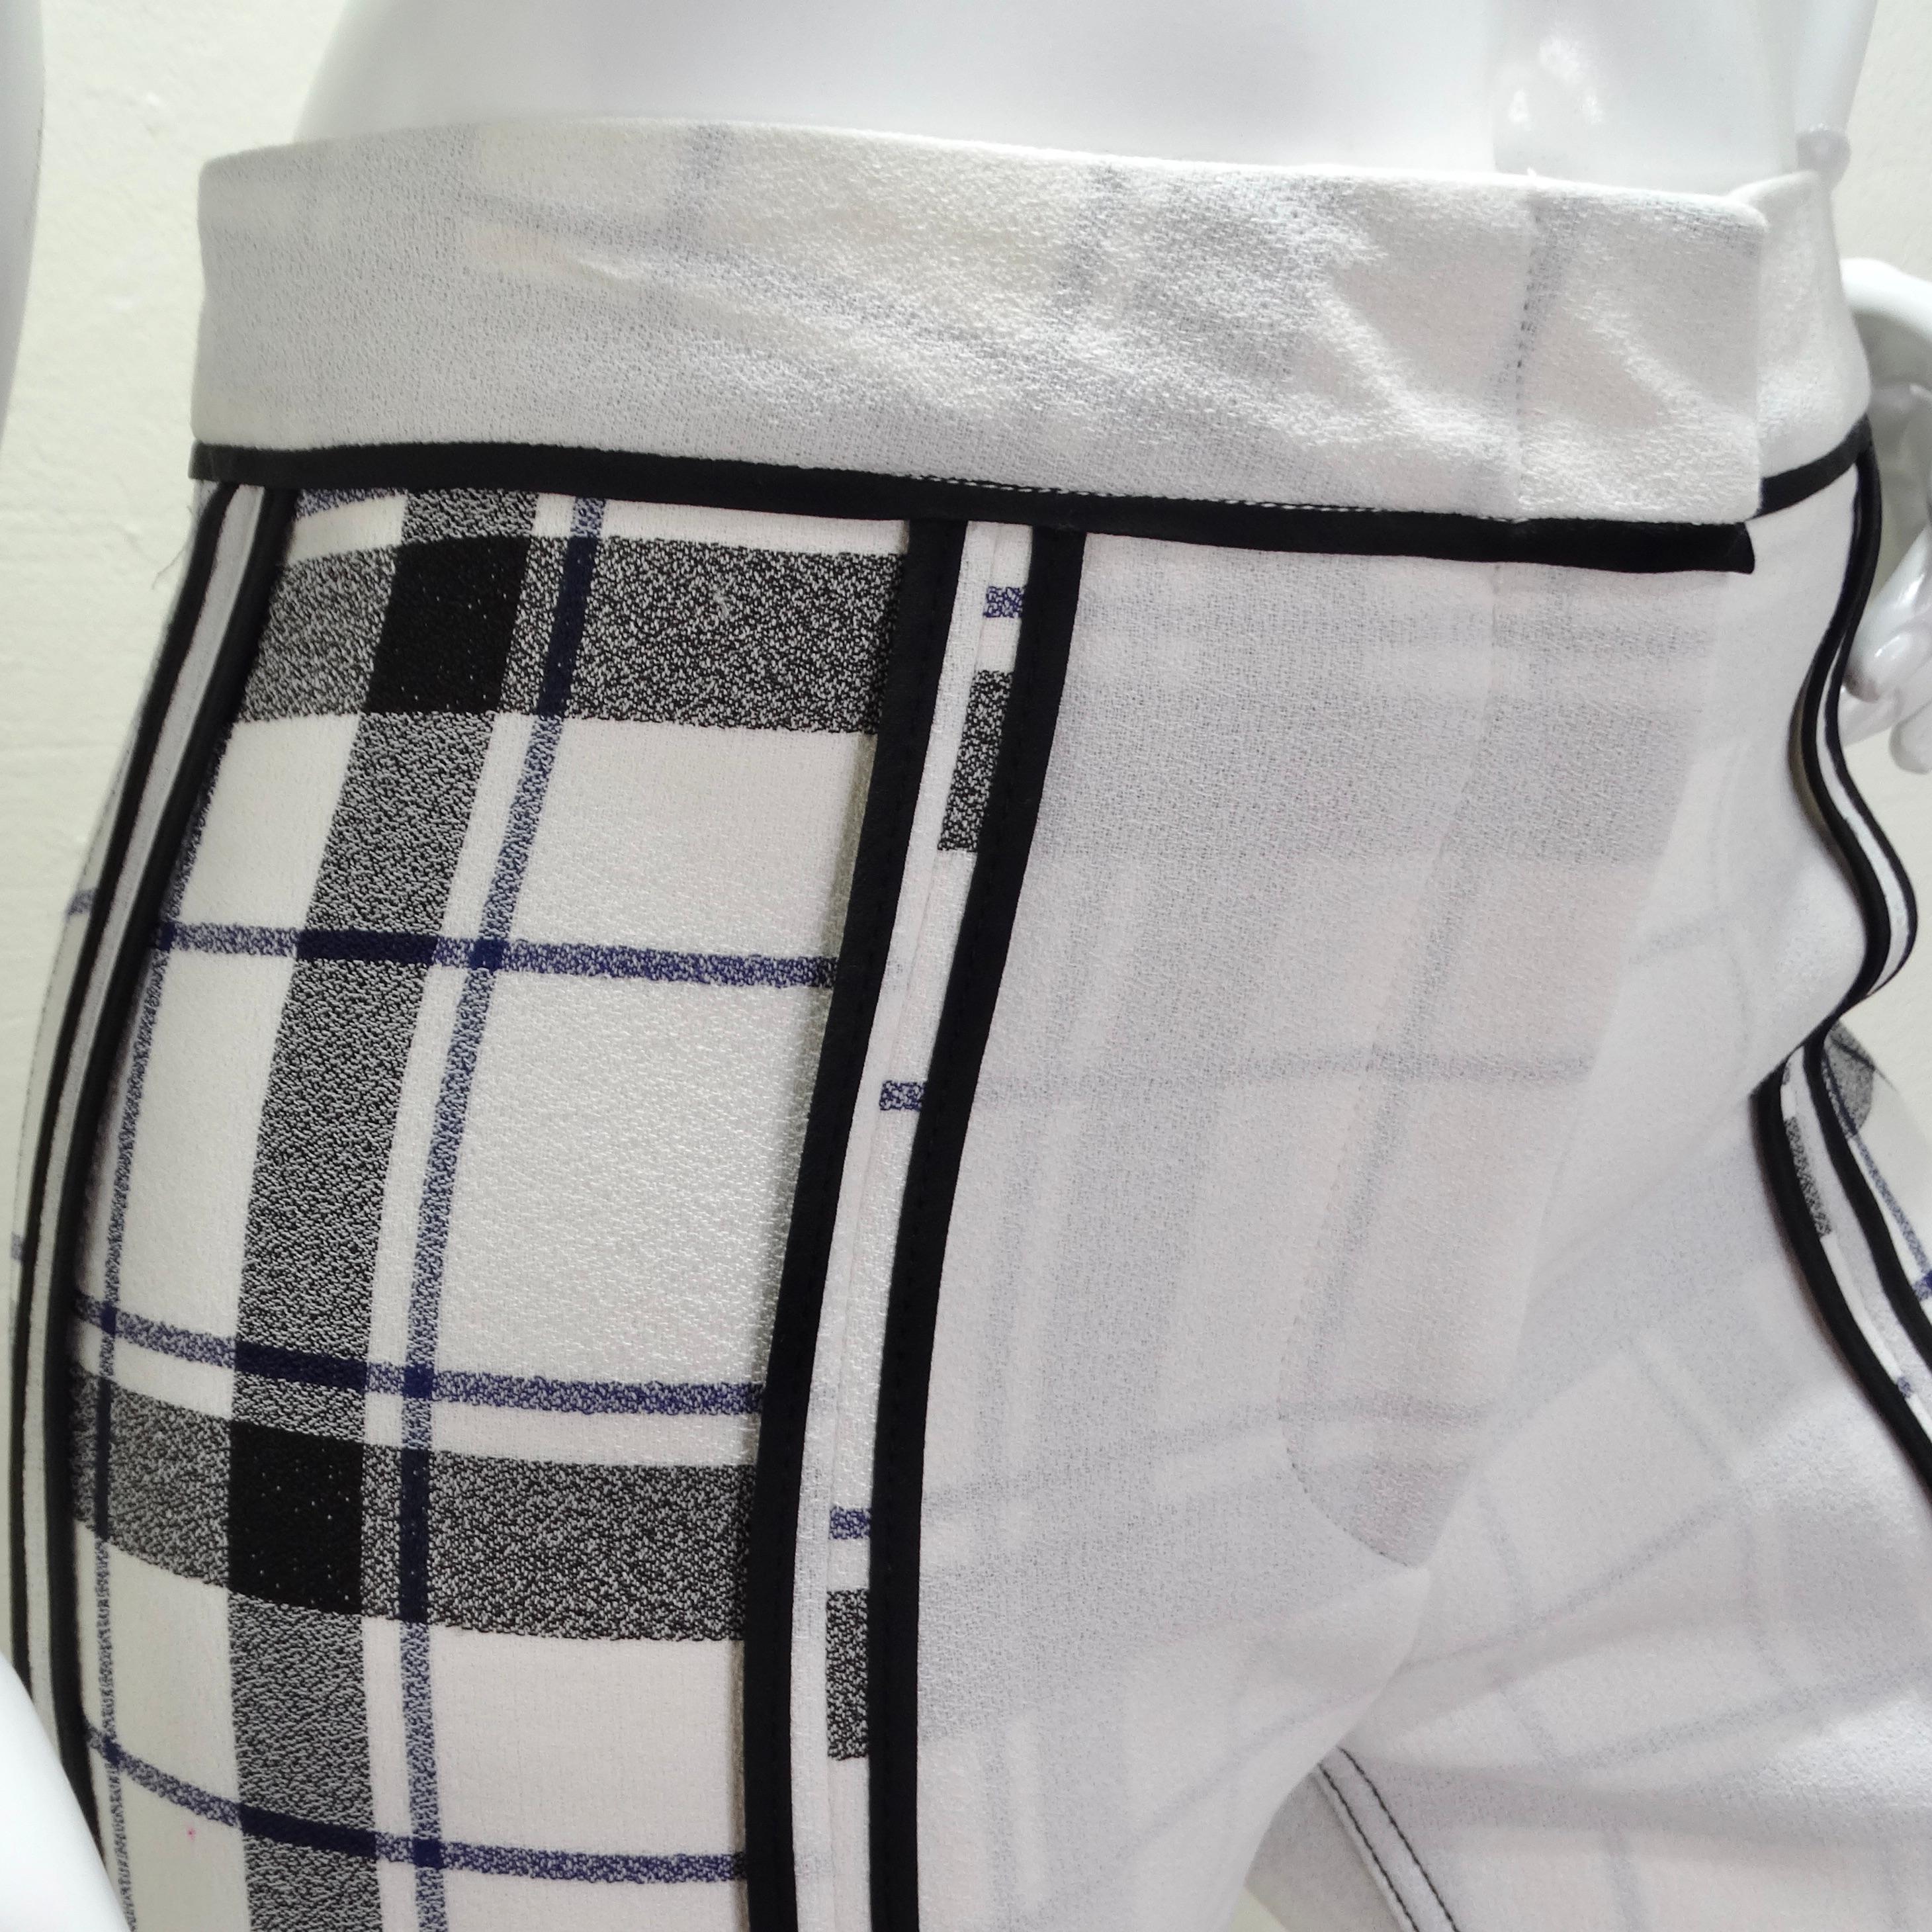 Acne Studios Plaid Trousers In Excellent Condition For Sale In Scottsdale, AZ